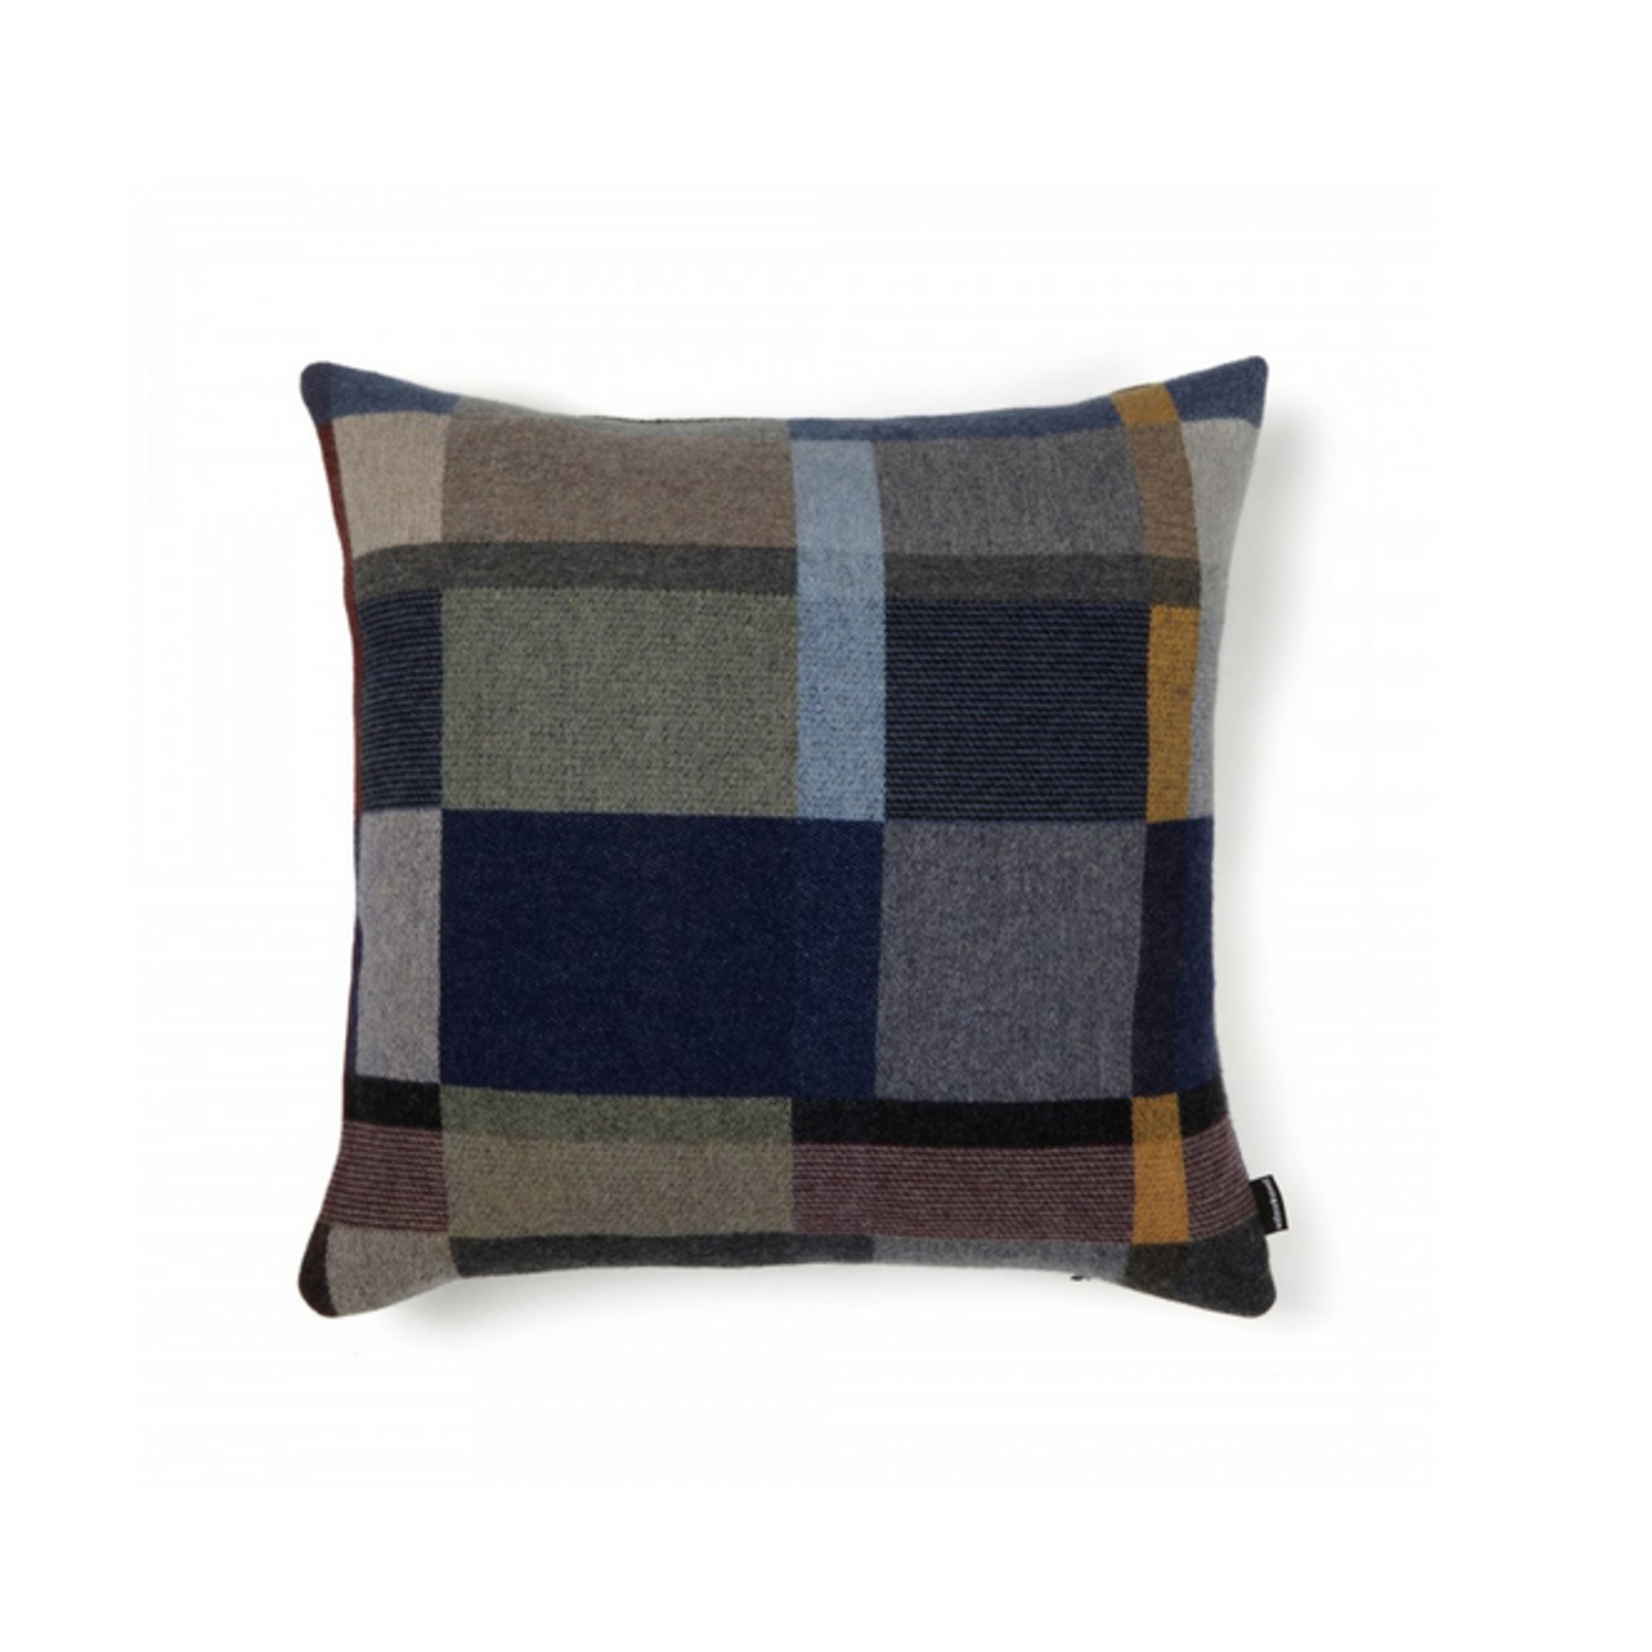 Wallace Sewell W&S Erno Block Dark Lambswool Cushion Cover 20 x 20